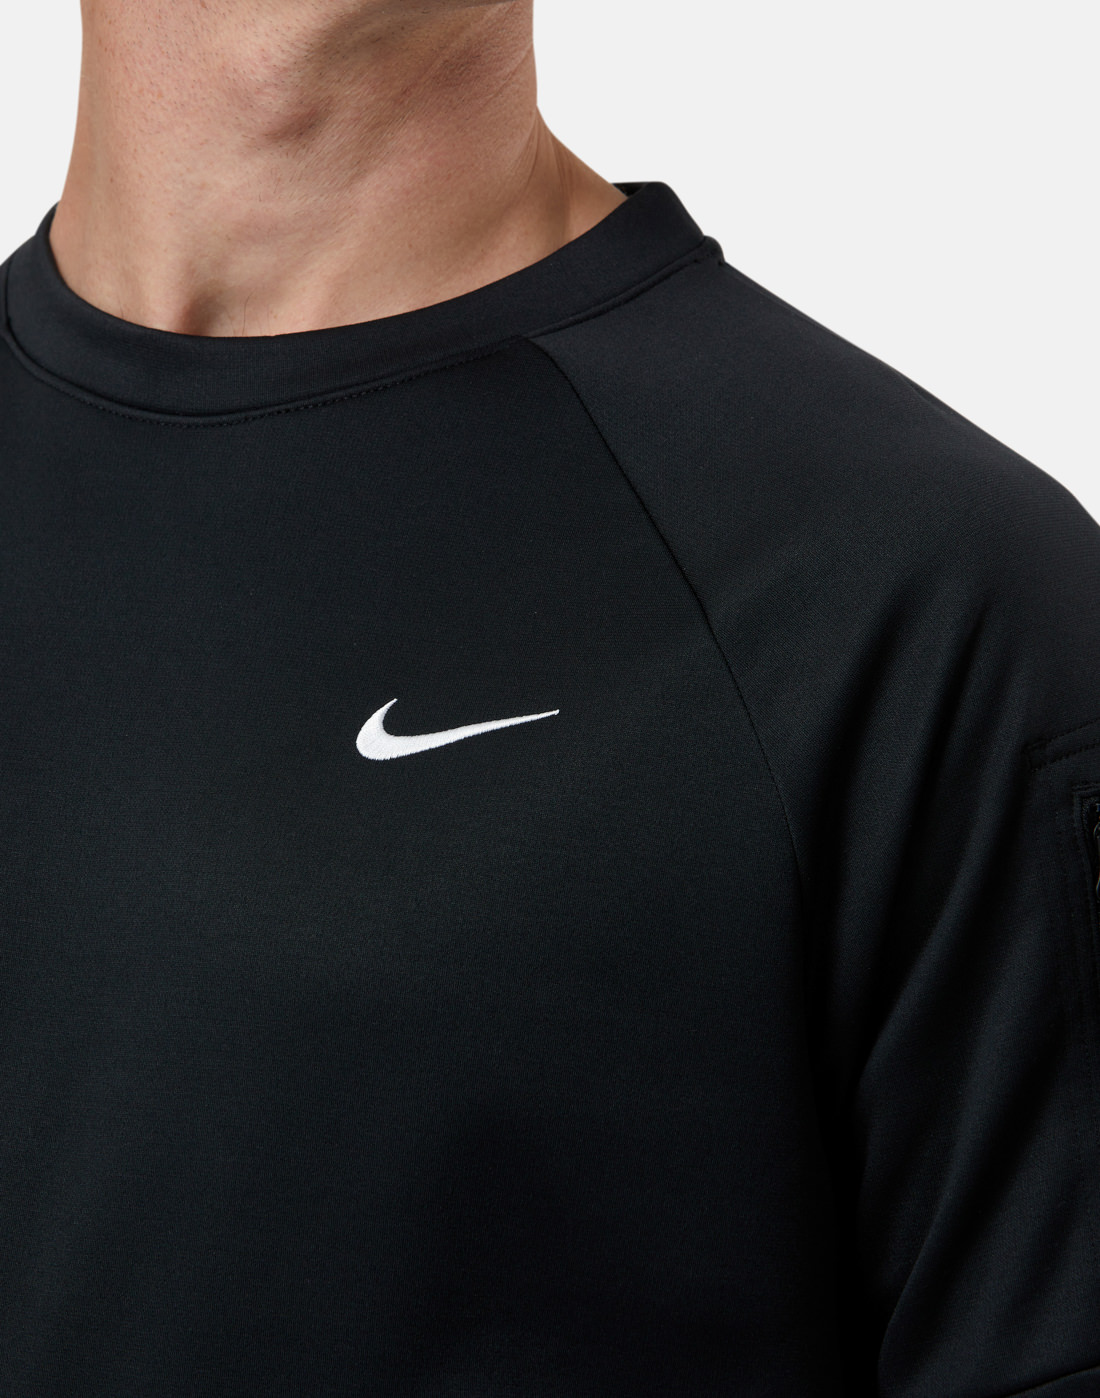 Nike Mens Therma Fit Crew - Black | Life Style Sports IE